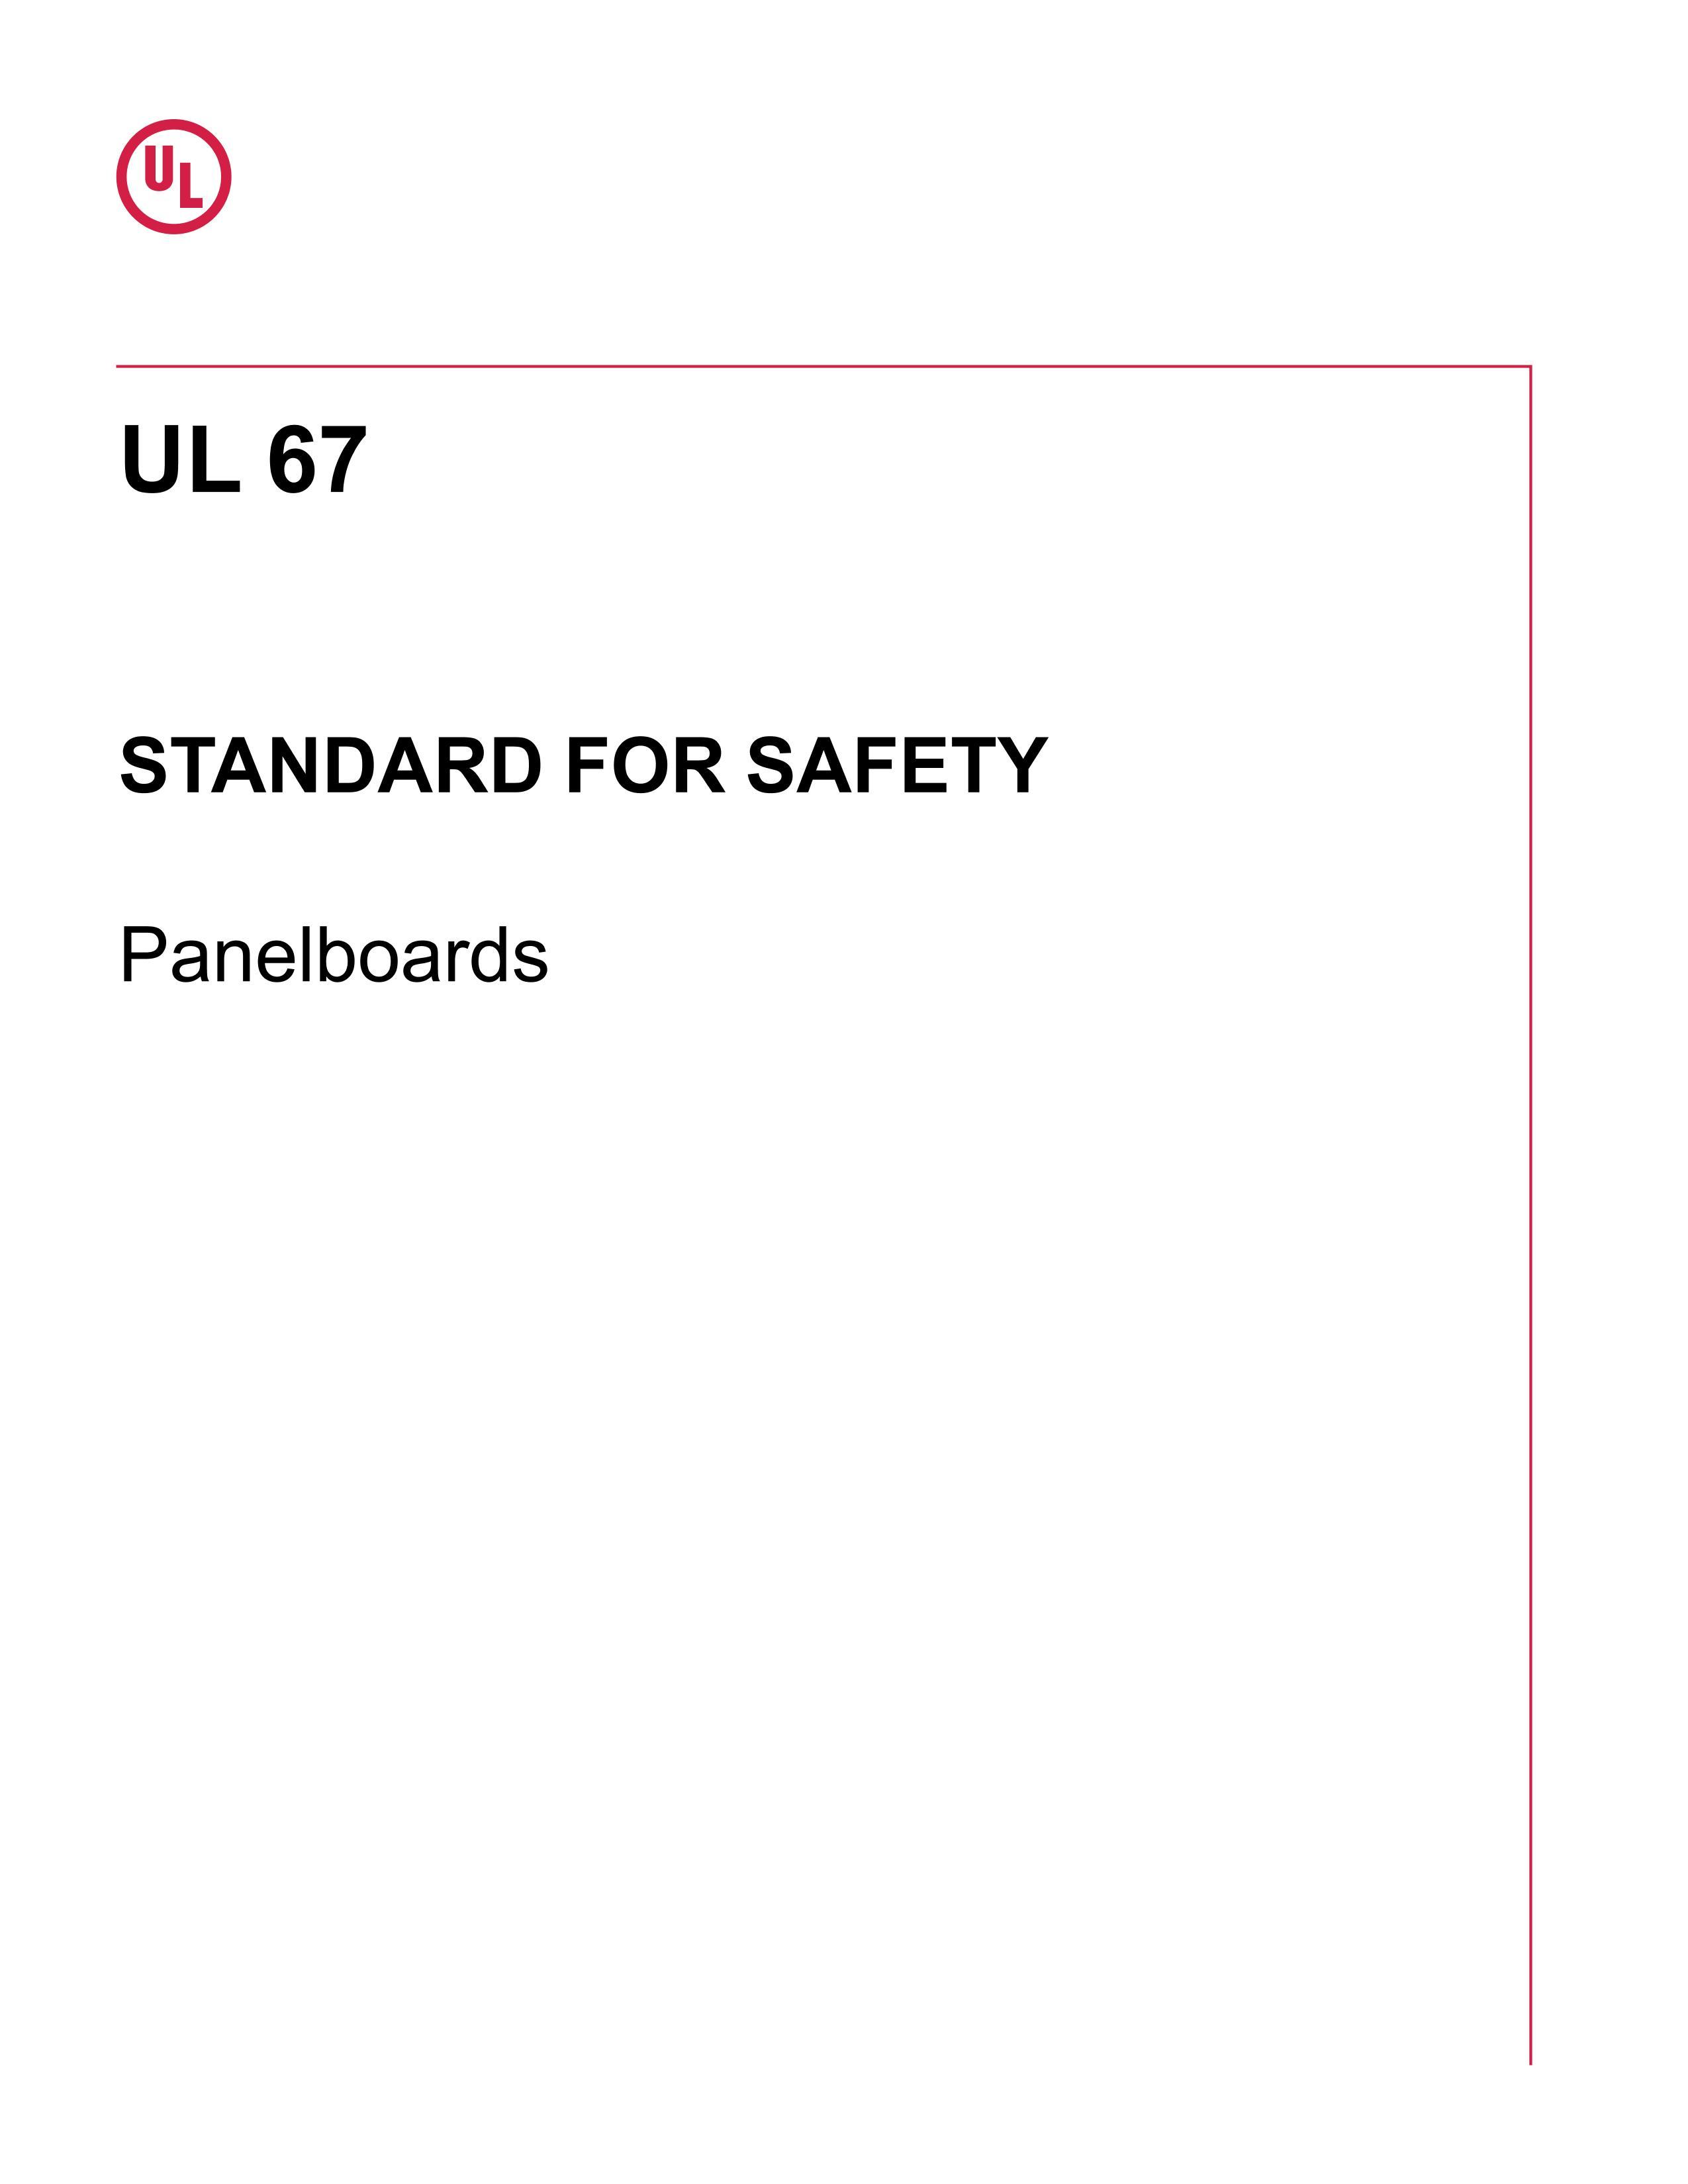 UL 67-2023 STANDARD FOR SAFETY Panelboards.pdf1ҳ